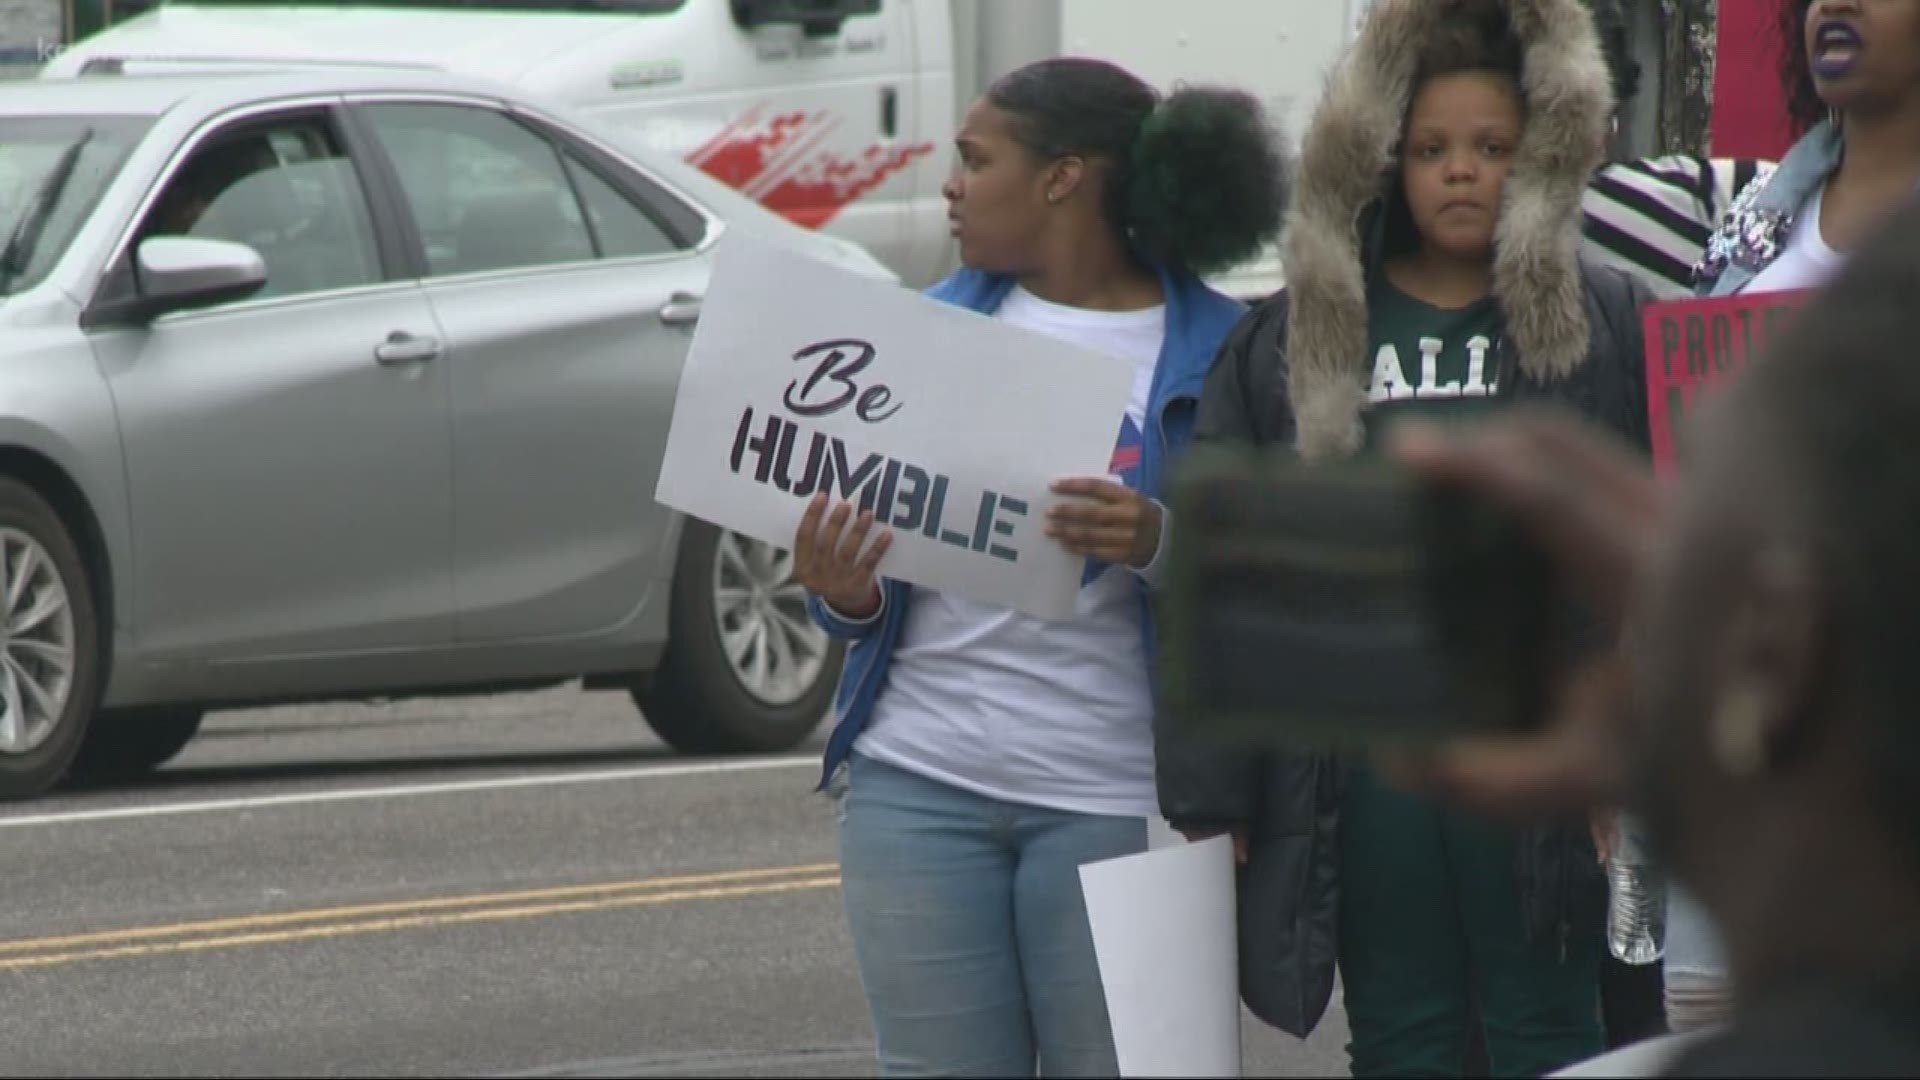 Family, friends gathered to rally and march for Andre Gladen